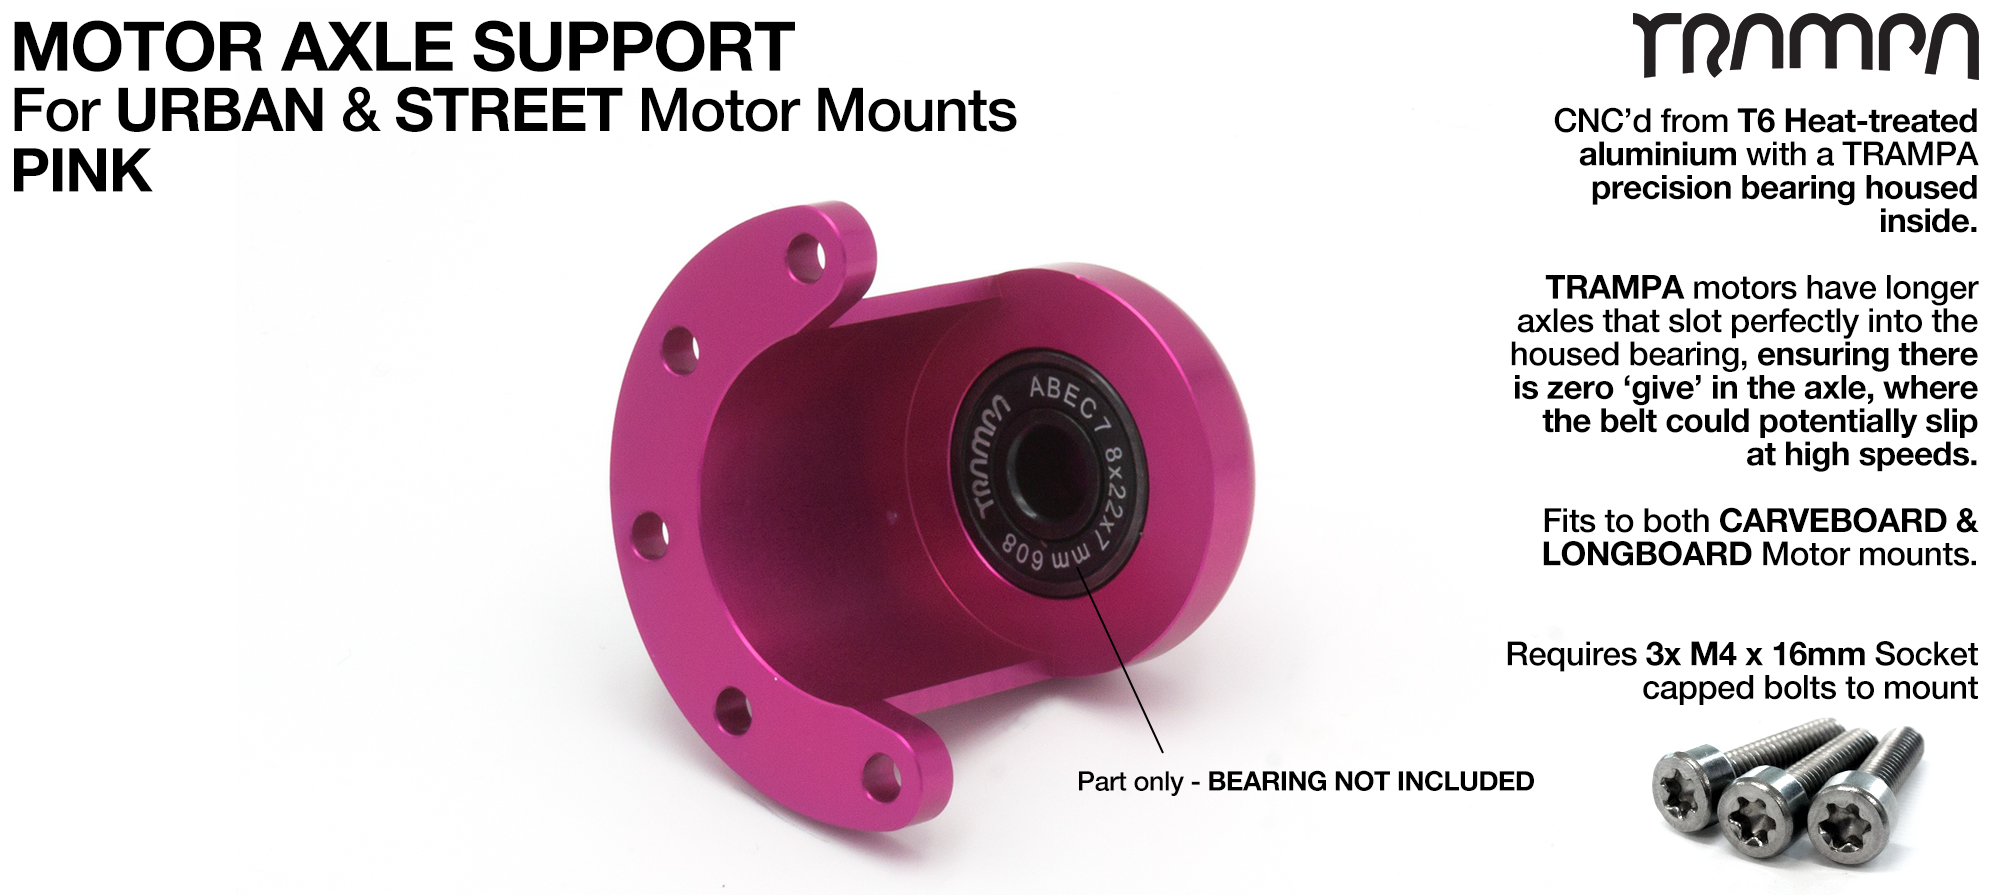 Motor Axle Support for Spring Truck Motor Mounts UNIVERSAL - PINK